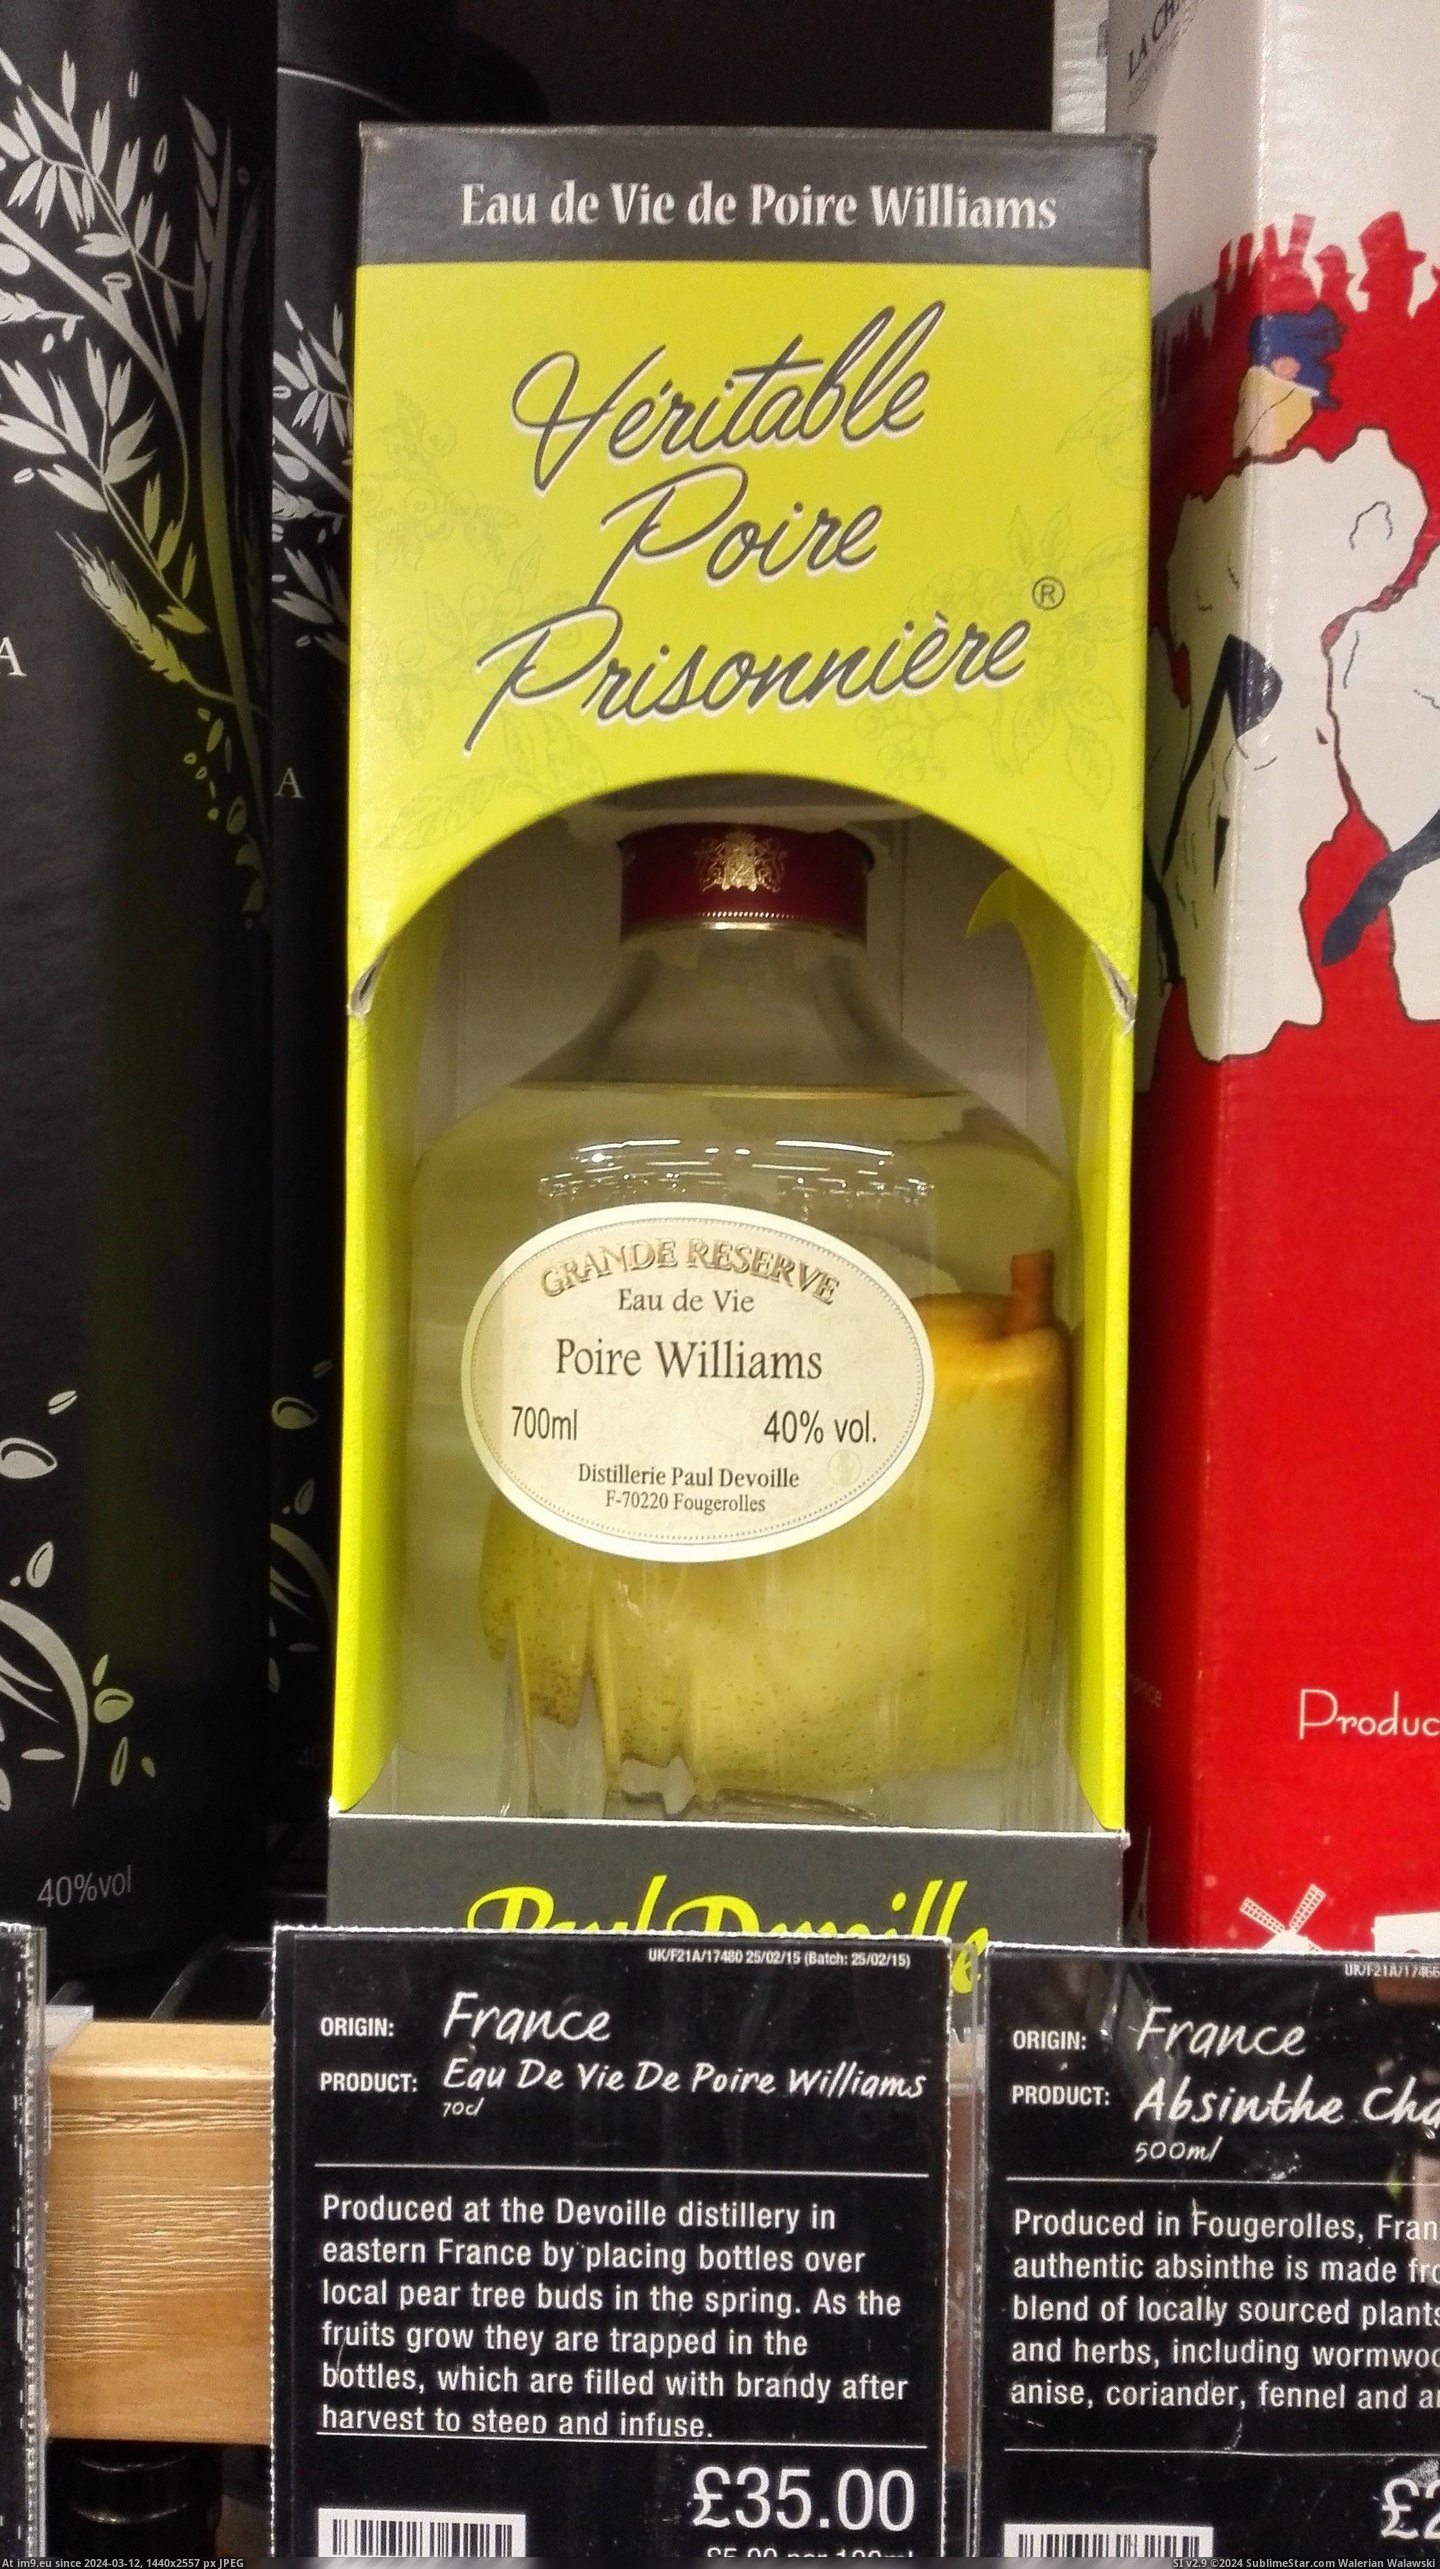 #Bottle #Added #Pear #Alcohol #Grown [Mildlyinteresting] This bottle has a pear grown inside it before the alcohol is added Pic. (Изображение из альбом My r/MILDLYINTERESTING favs))